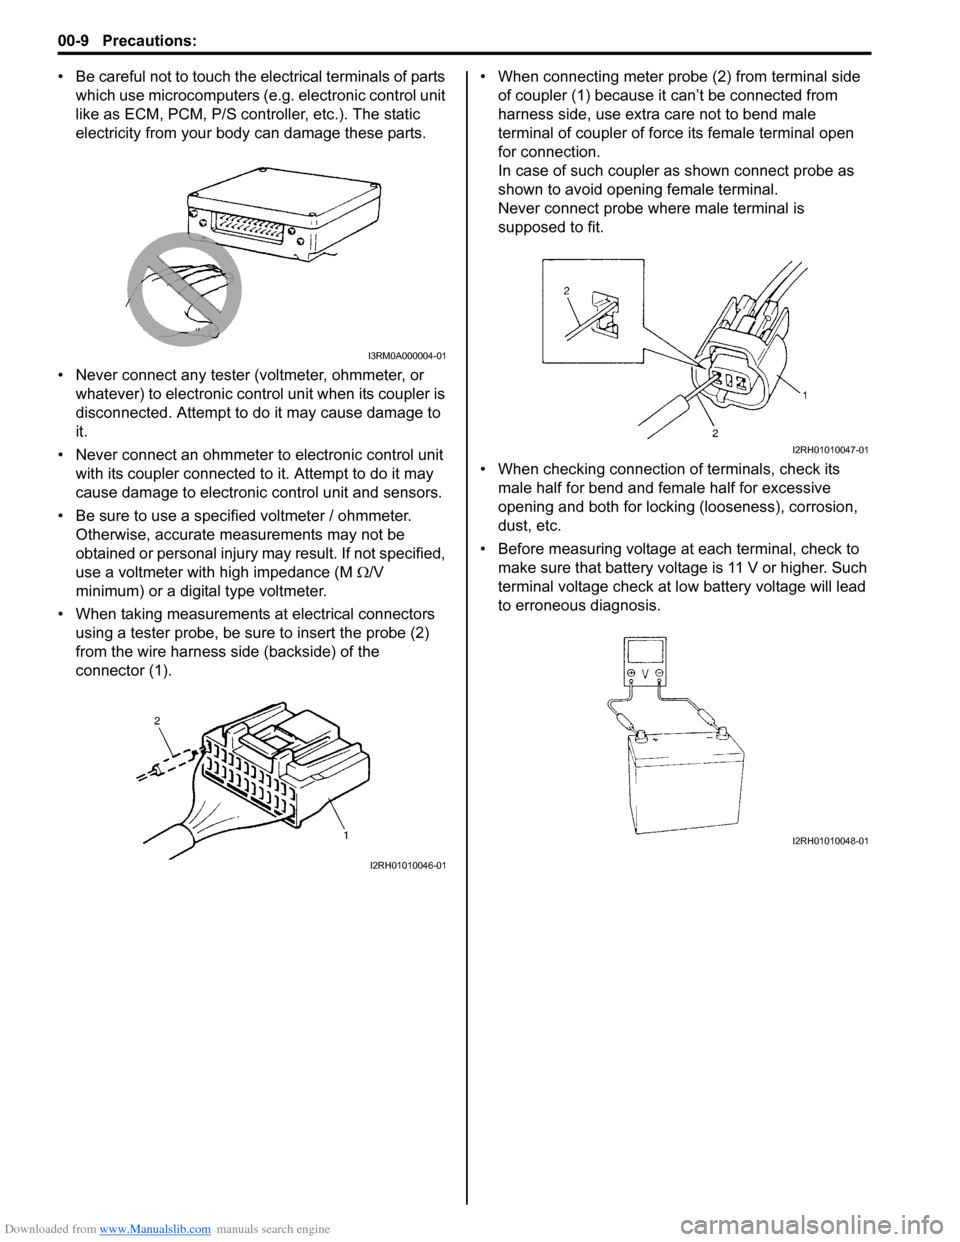 SUZUKI SWIFT 2005 2.G Service Workshop Manual Downloaded from www.Manualslib.com manuals search engine 00-9 Precautions: 
• Be careful not to touch the electrical terminals of parts which use microcomputers (e.g. electronic control unit 
like a